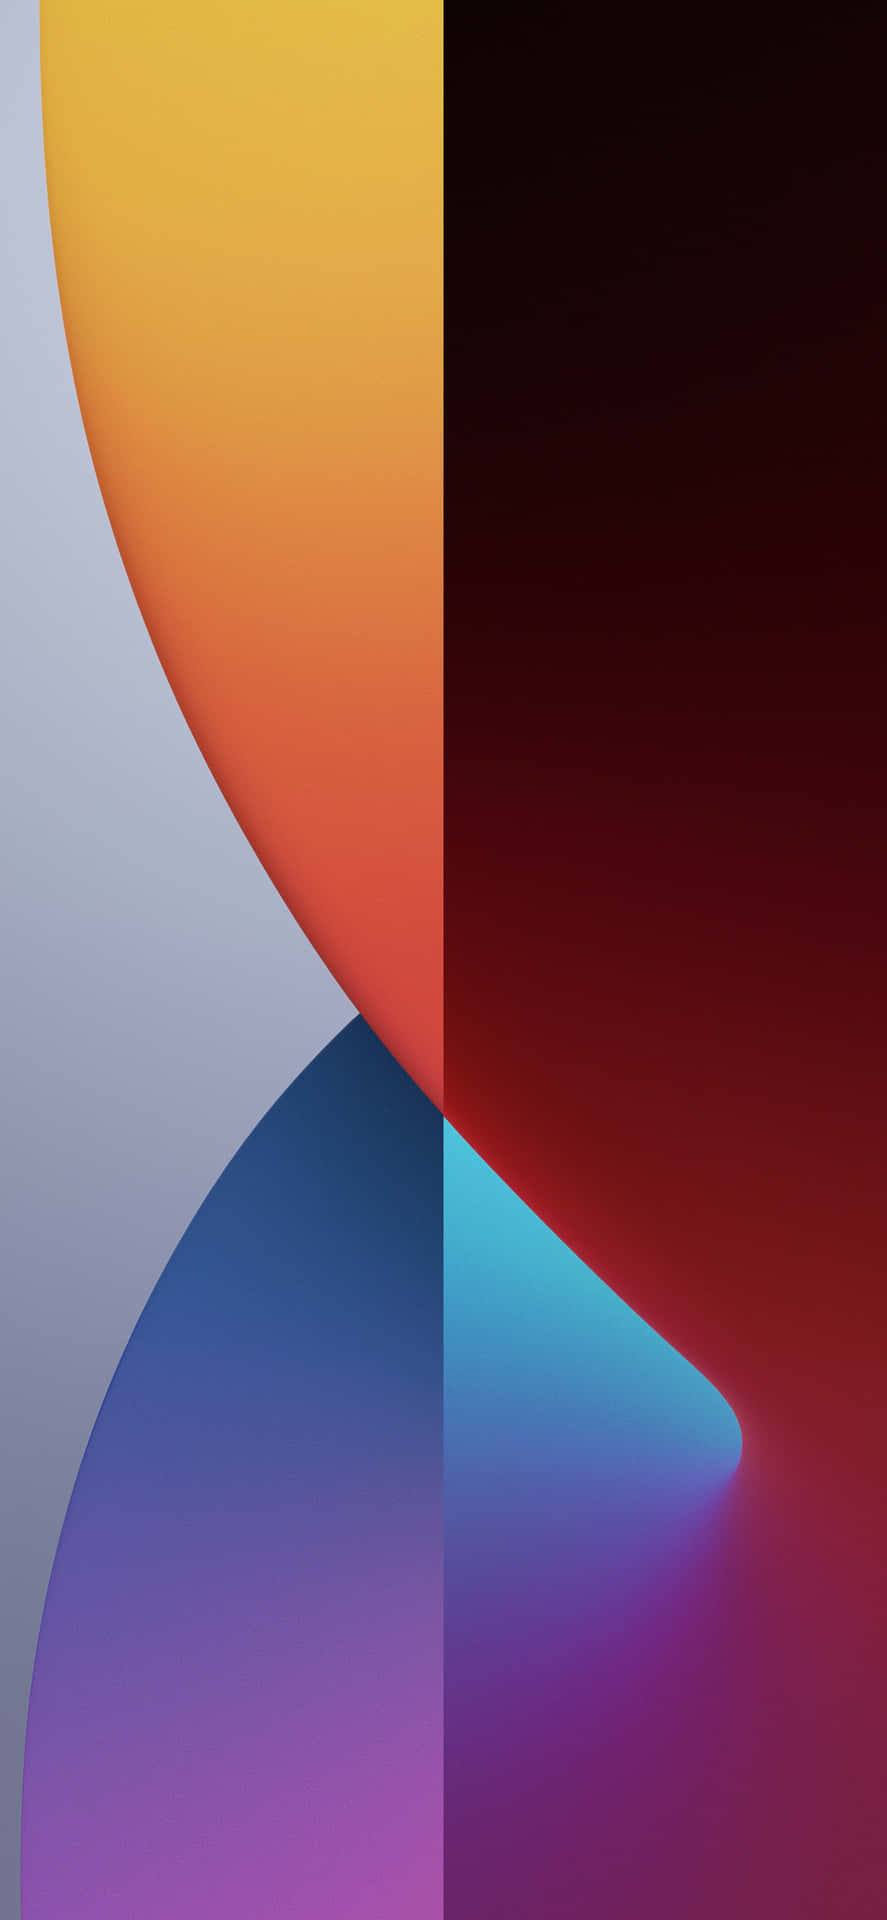 Download Ios 15 Background | Wallpapers.com